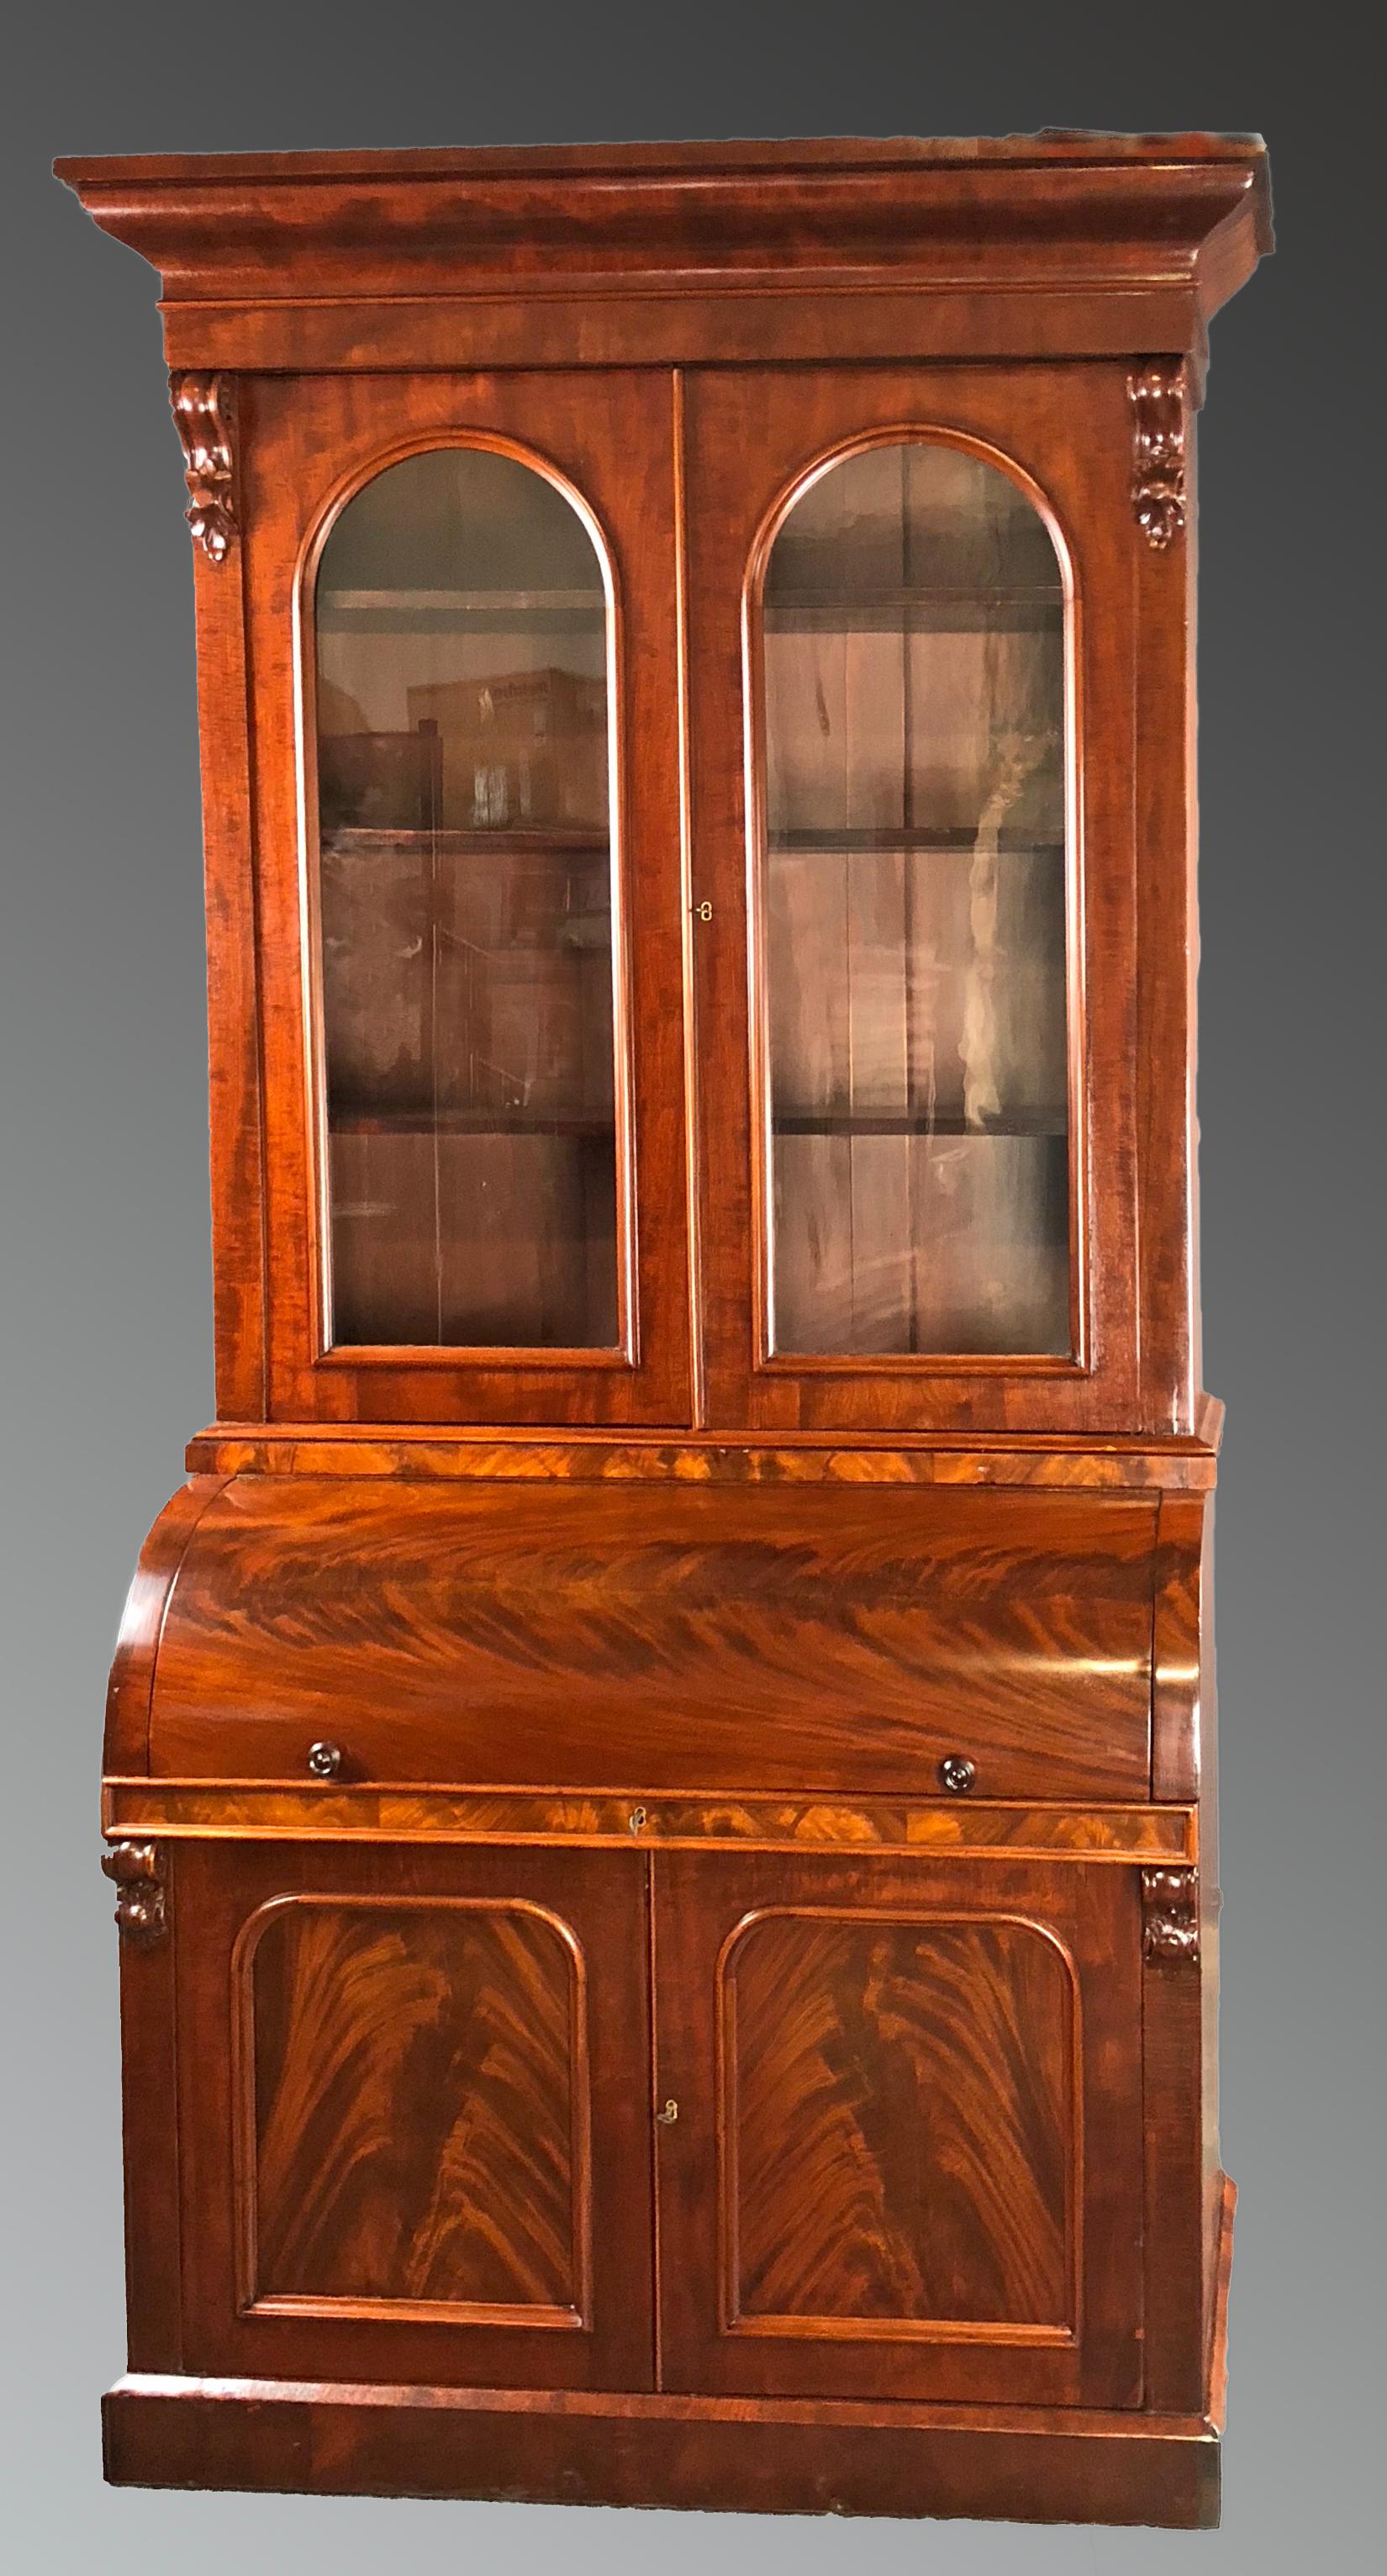 Bureau bookcase dating to the second half of the 19th century of English origin featuring the finest figured mahogany veneers. The cylinder top bureau once open, it reveals a series of compartments and small drawers with attractive bird's-eye maple